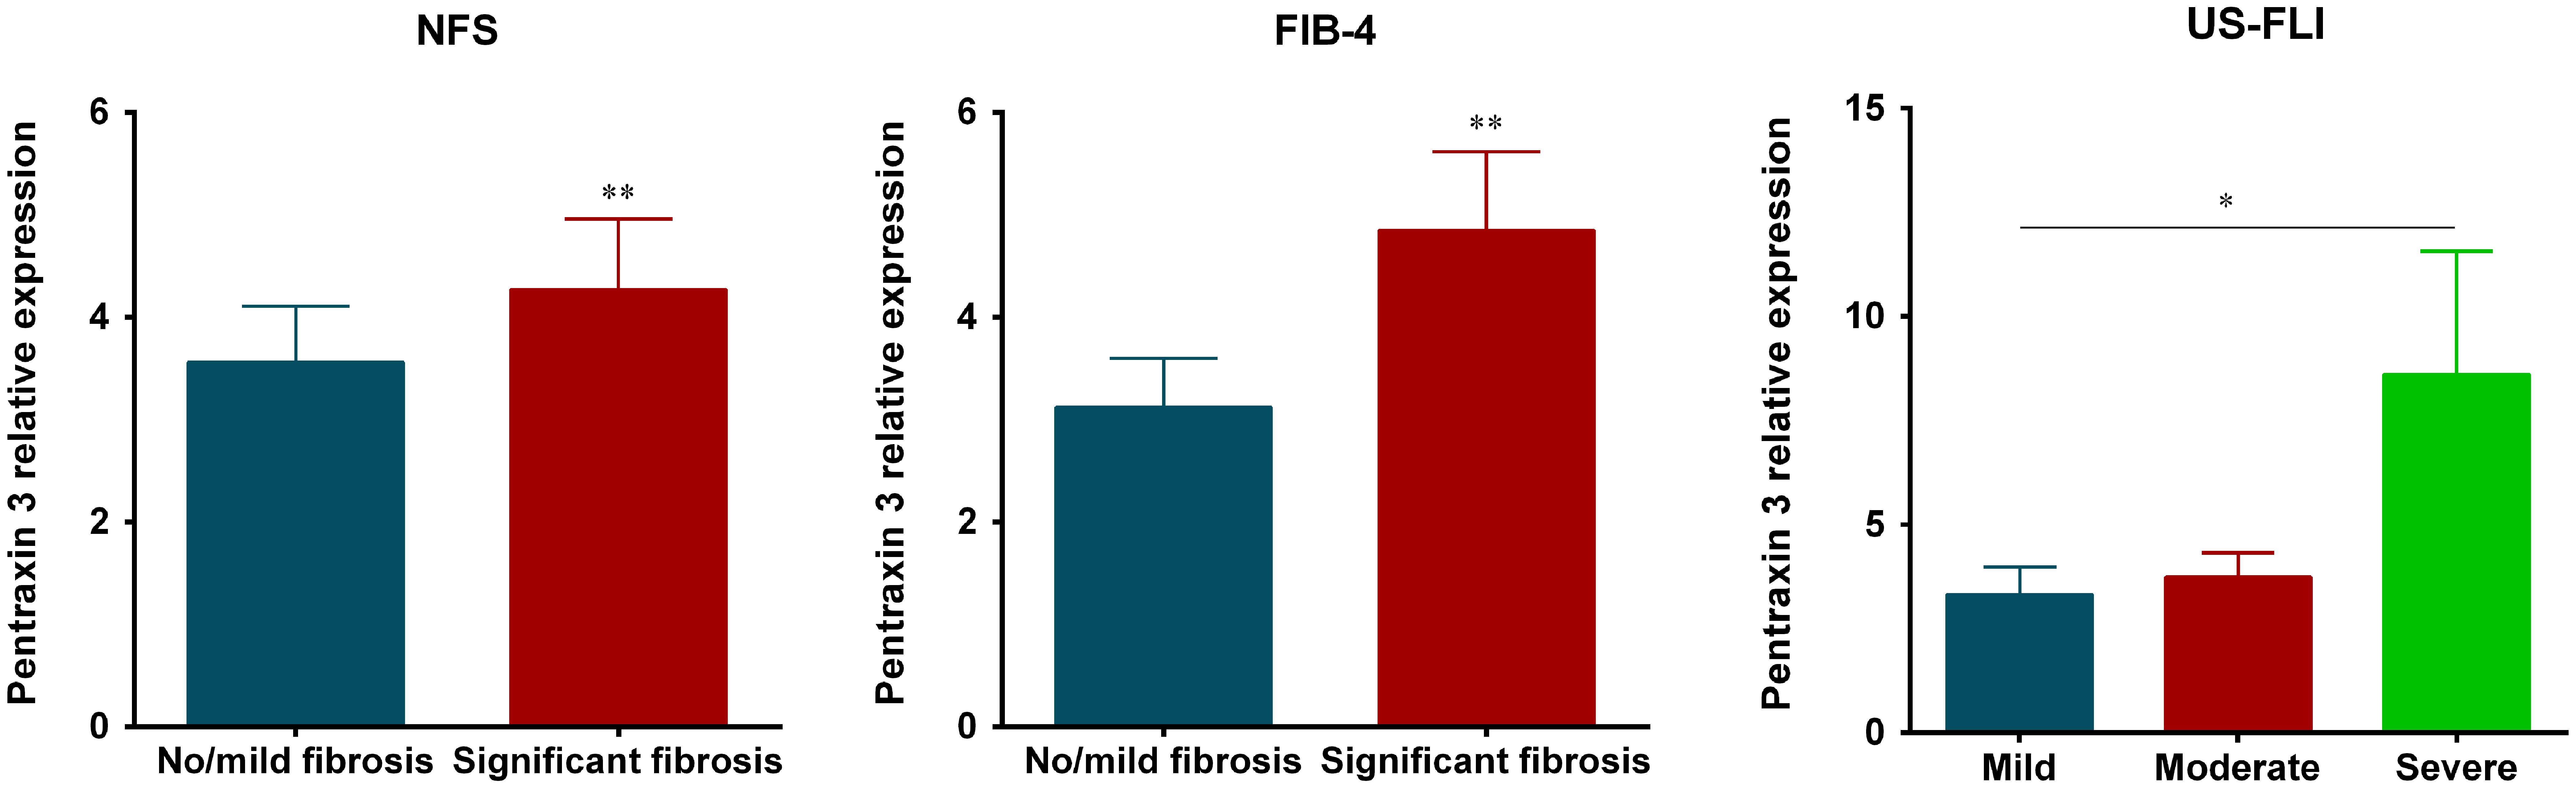 Sensitivity, specificity, and AUC of pentraxin 3 in advanced fibrosis.